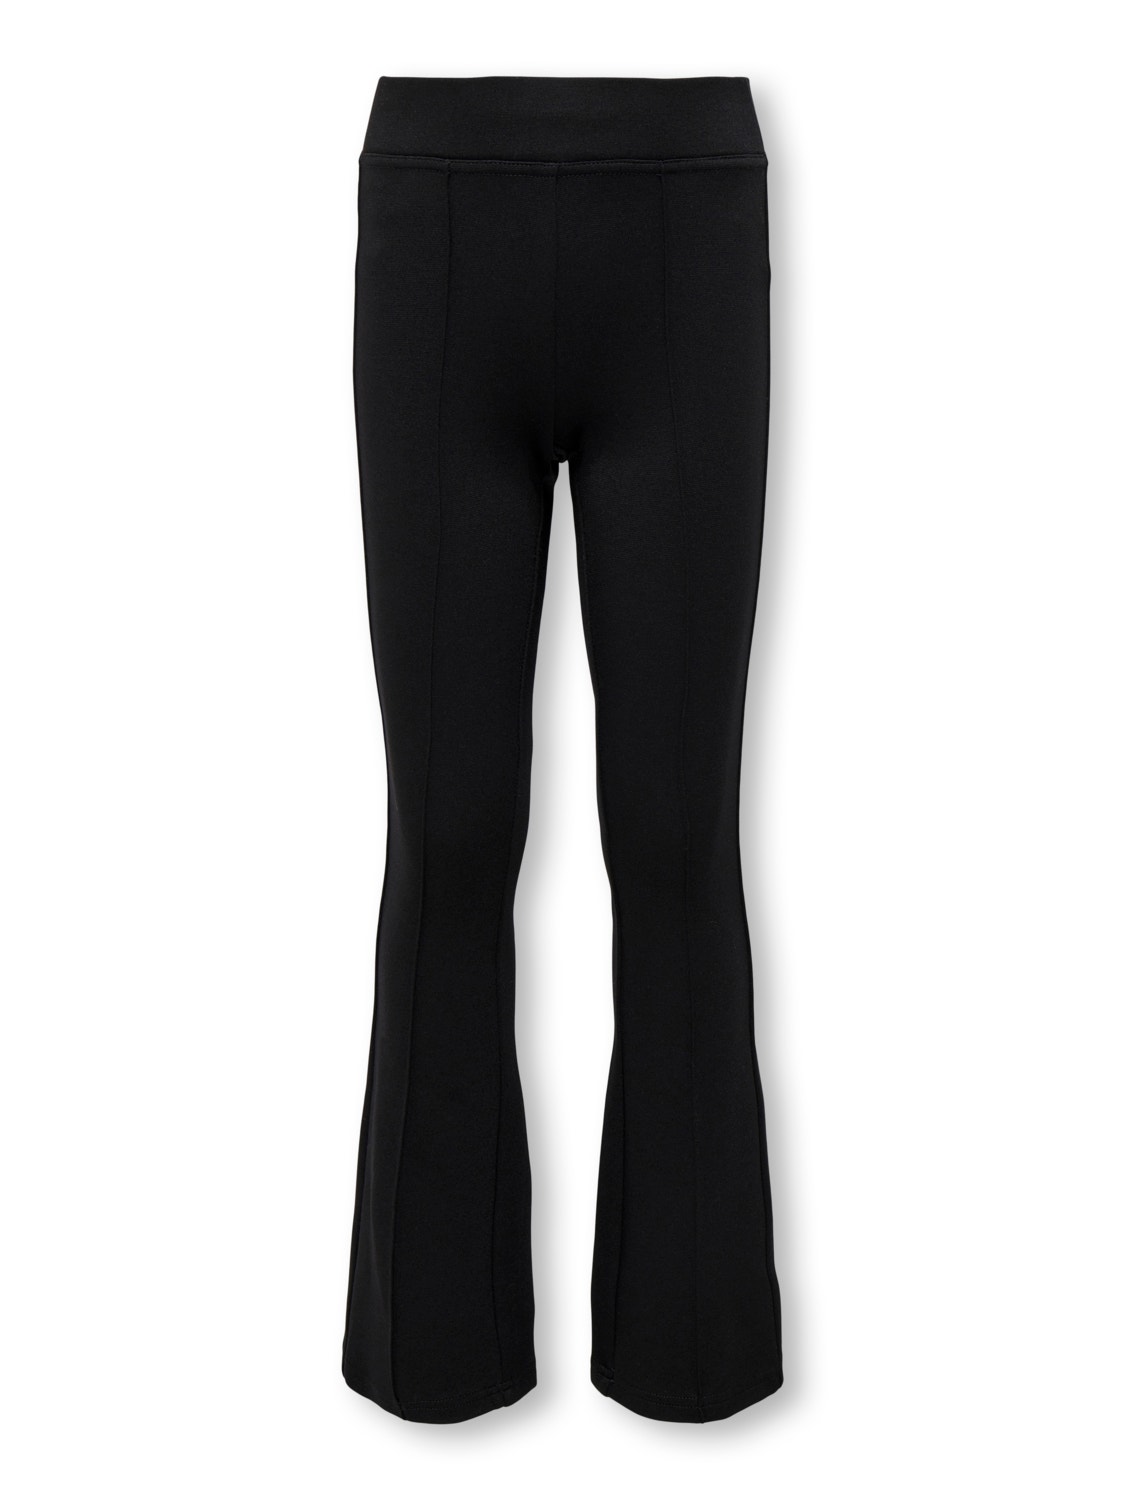 Leggings with a wide waistband - black, Trousers